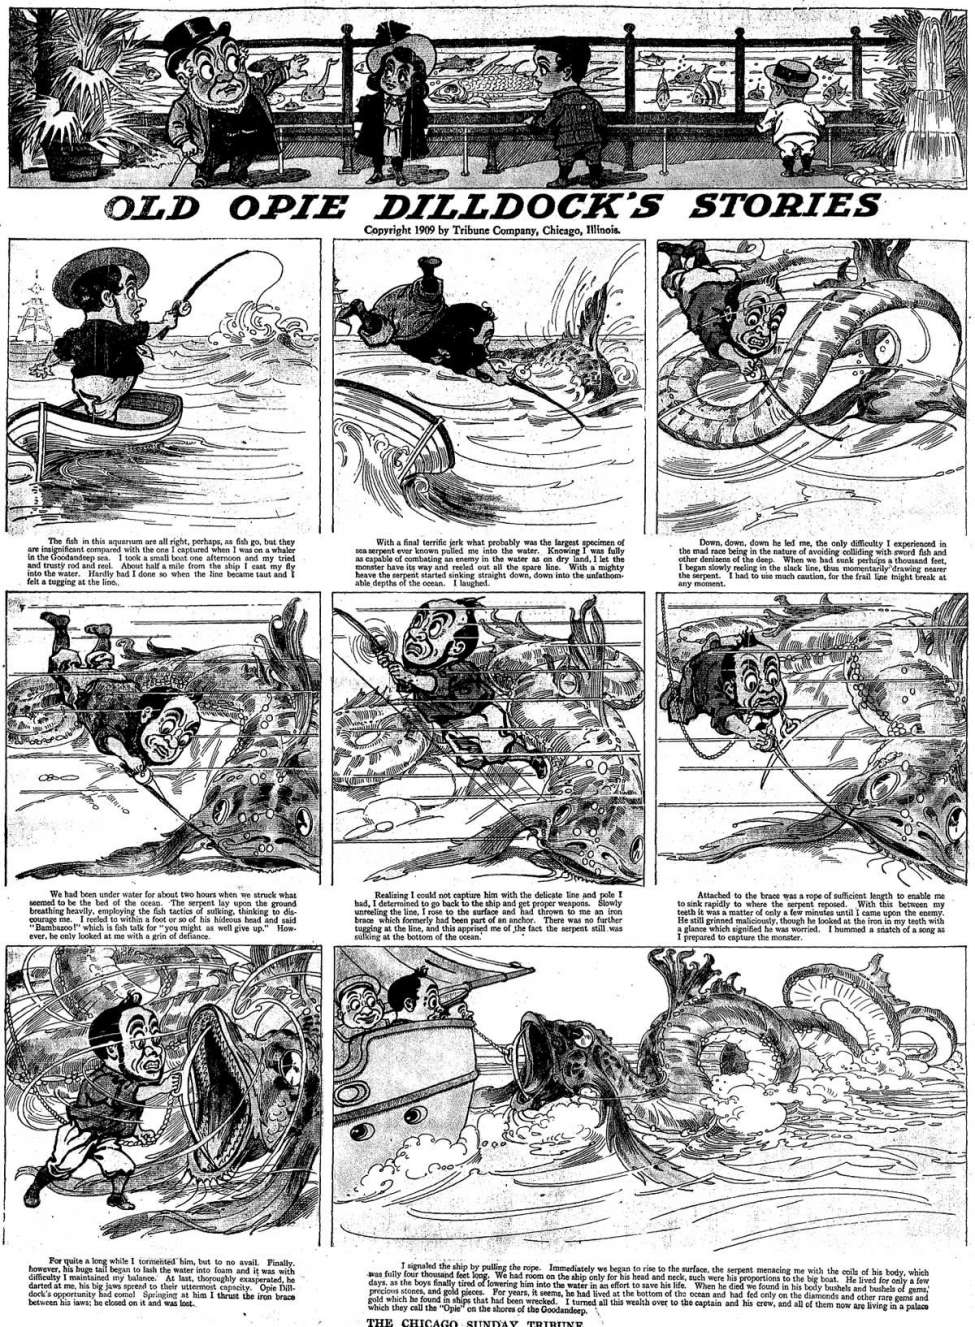 Comic Book Cover For Old Opie Dilldock - Chicago Tribune (1909)